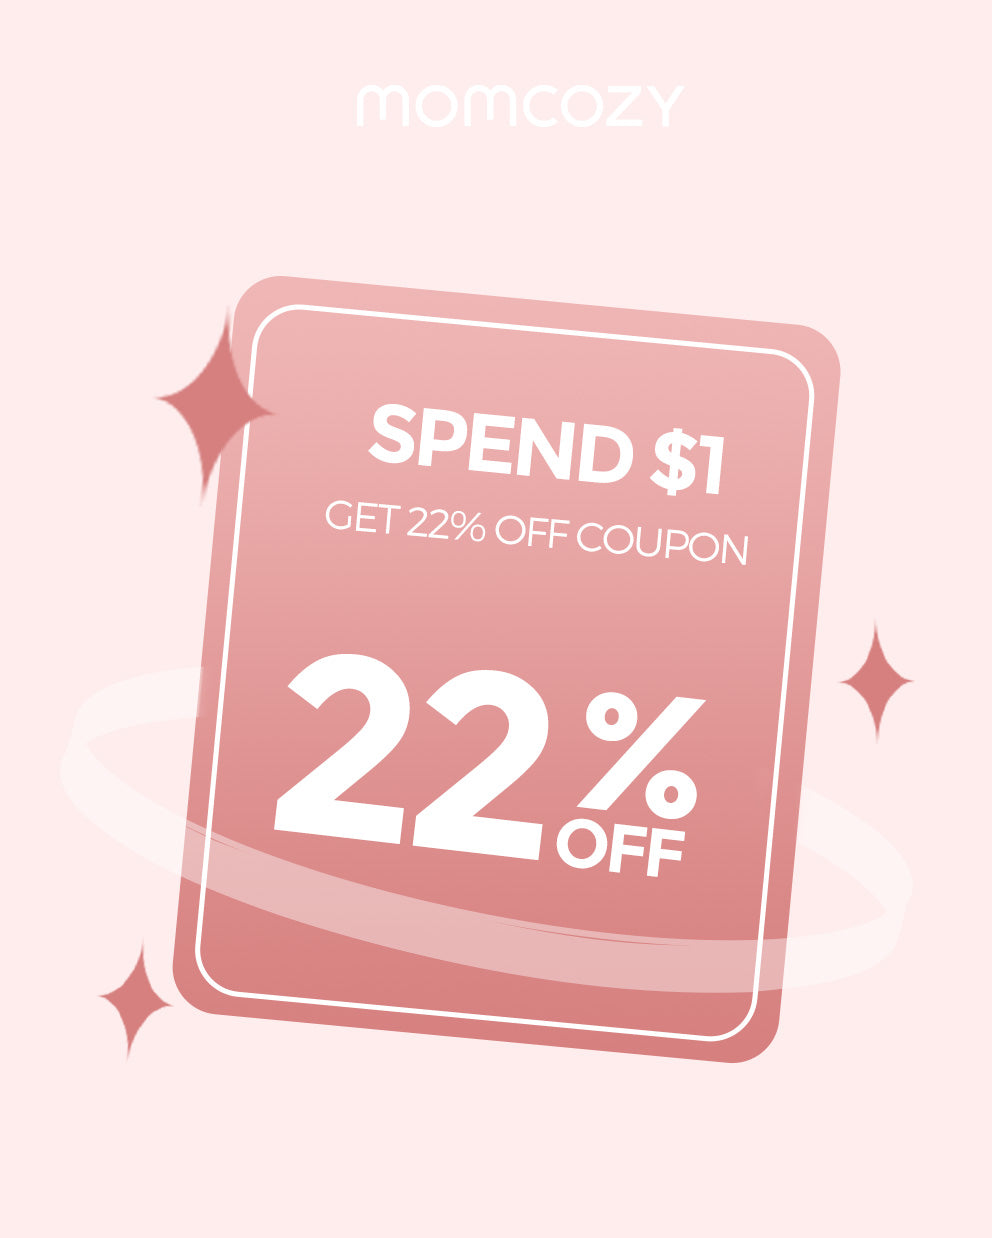 SALE ! ! ! Spend $1, Get 22% OFF Coupon